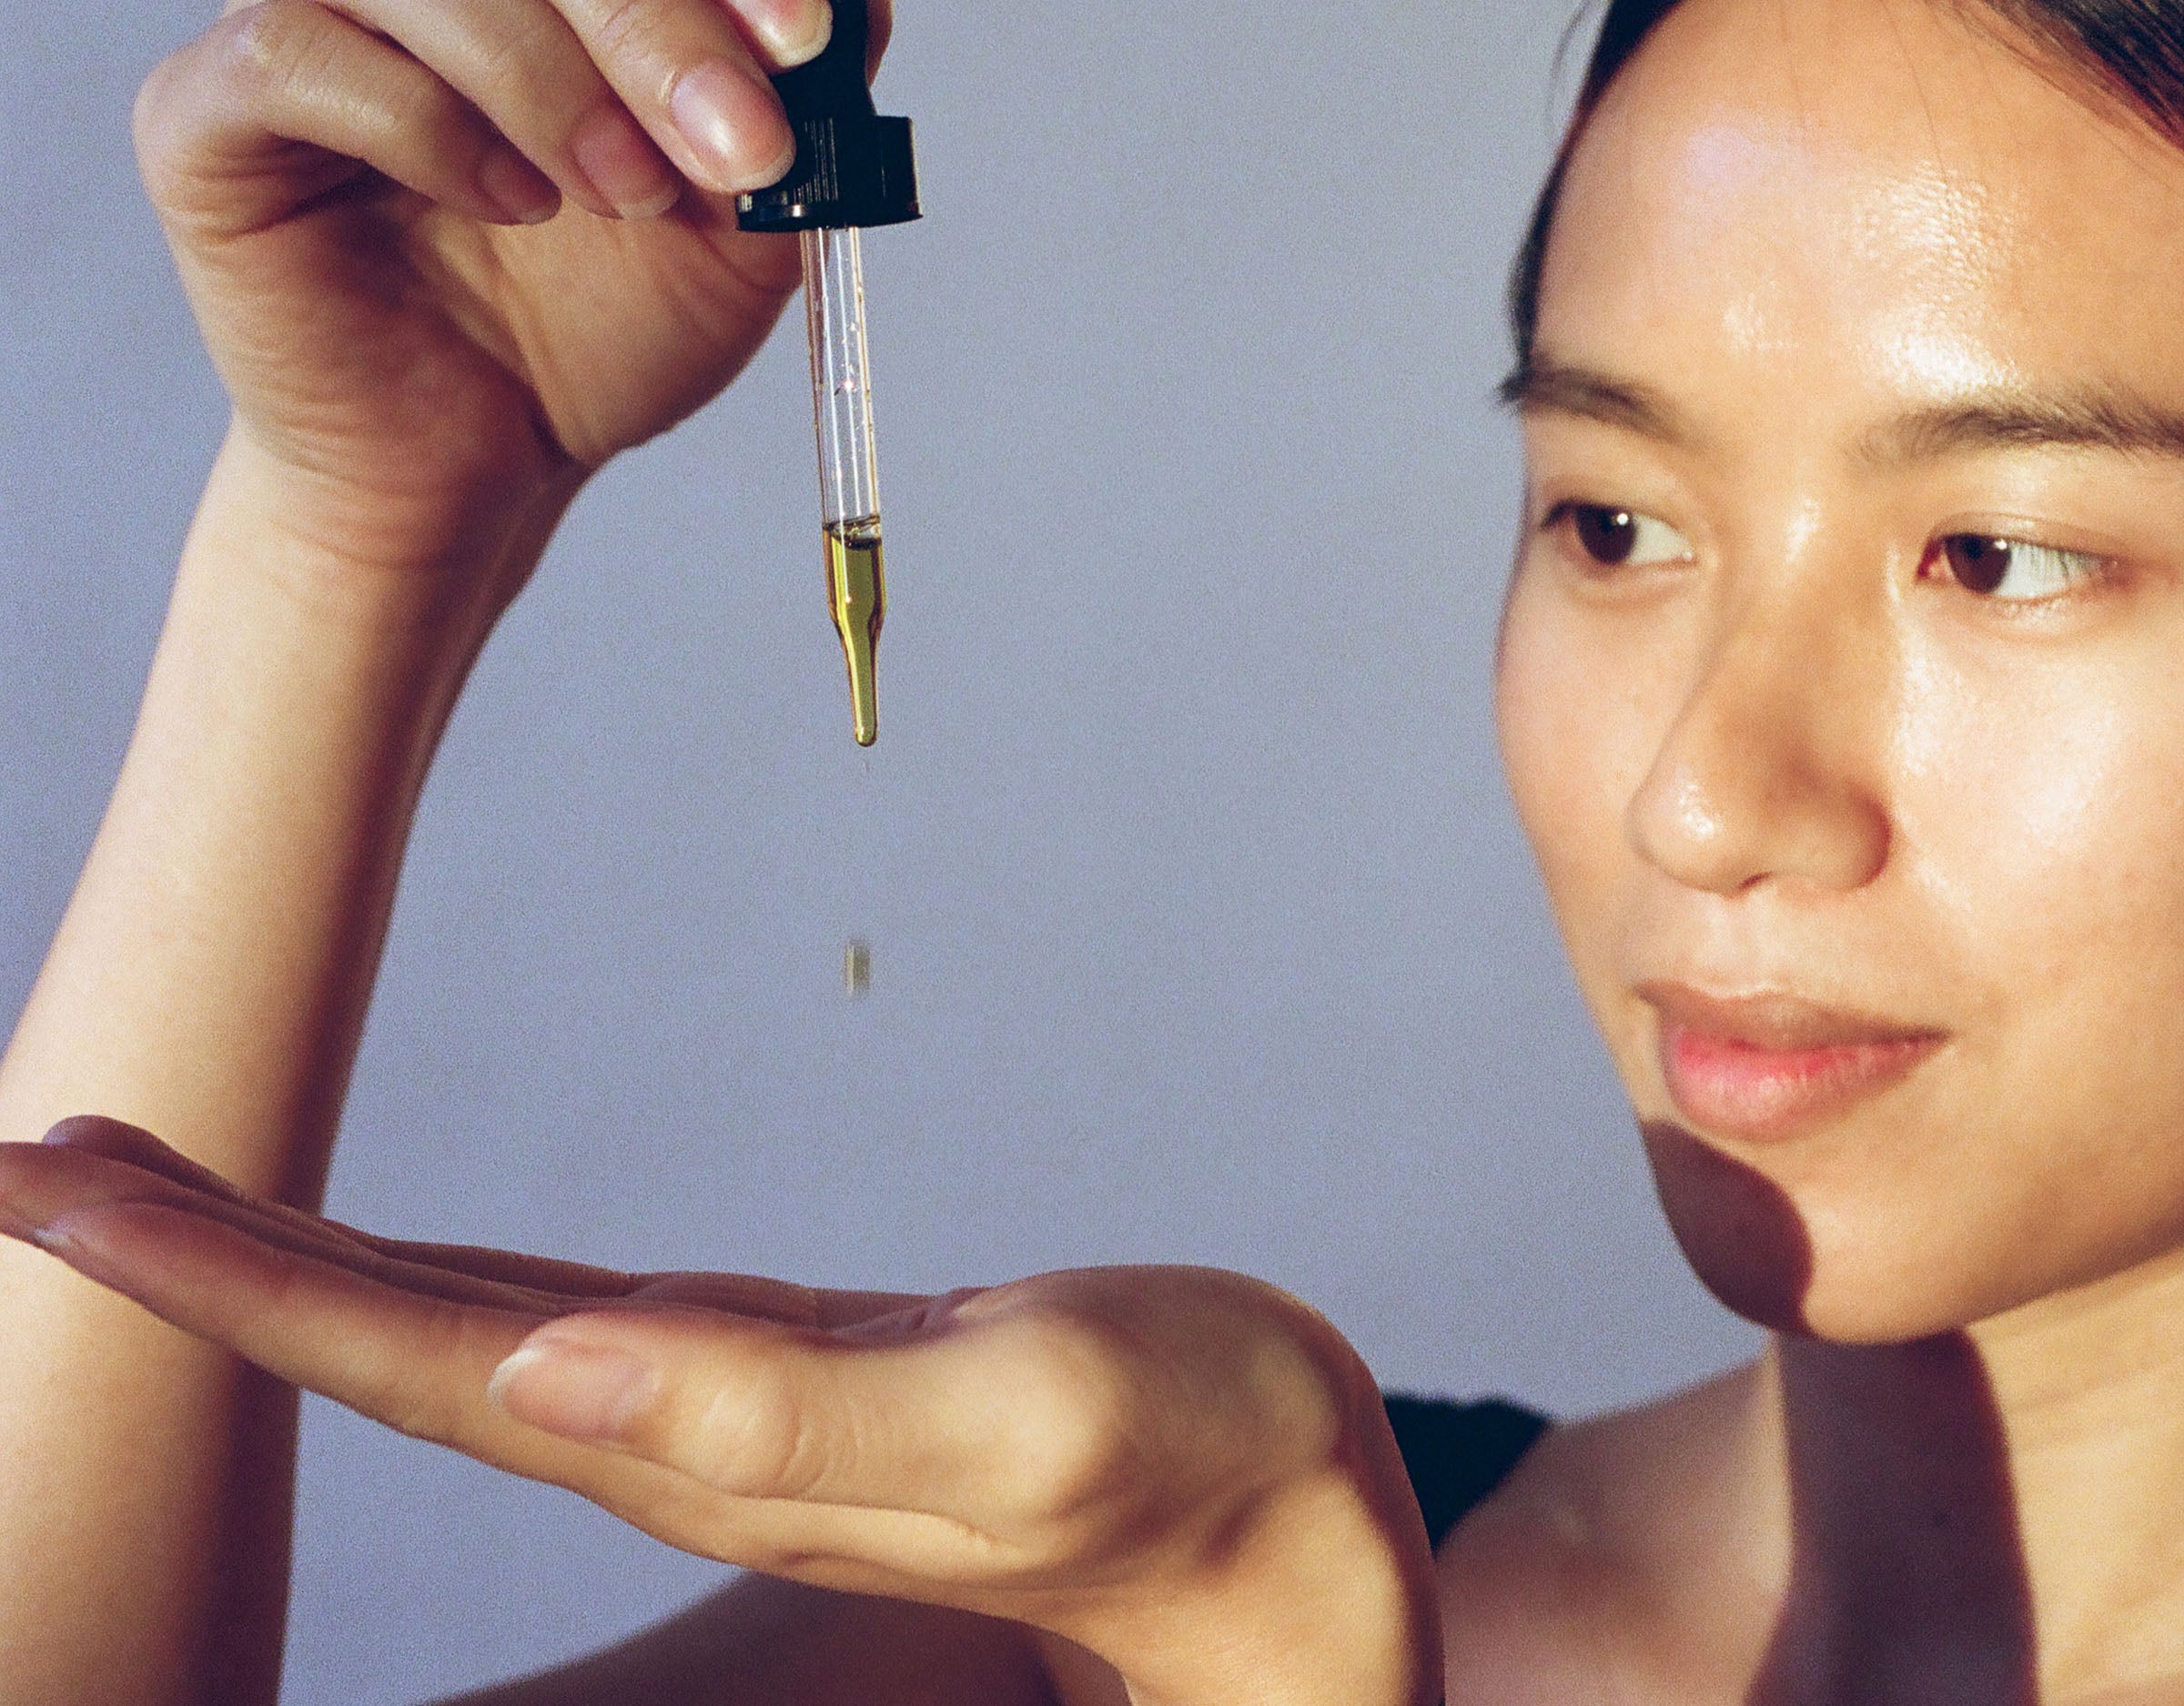 A close crop of an Asian femme person dripping face oil from a dropper into an outstretched hand